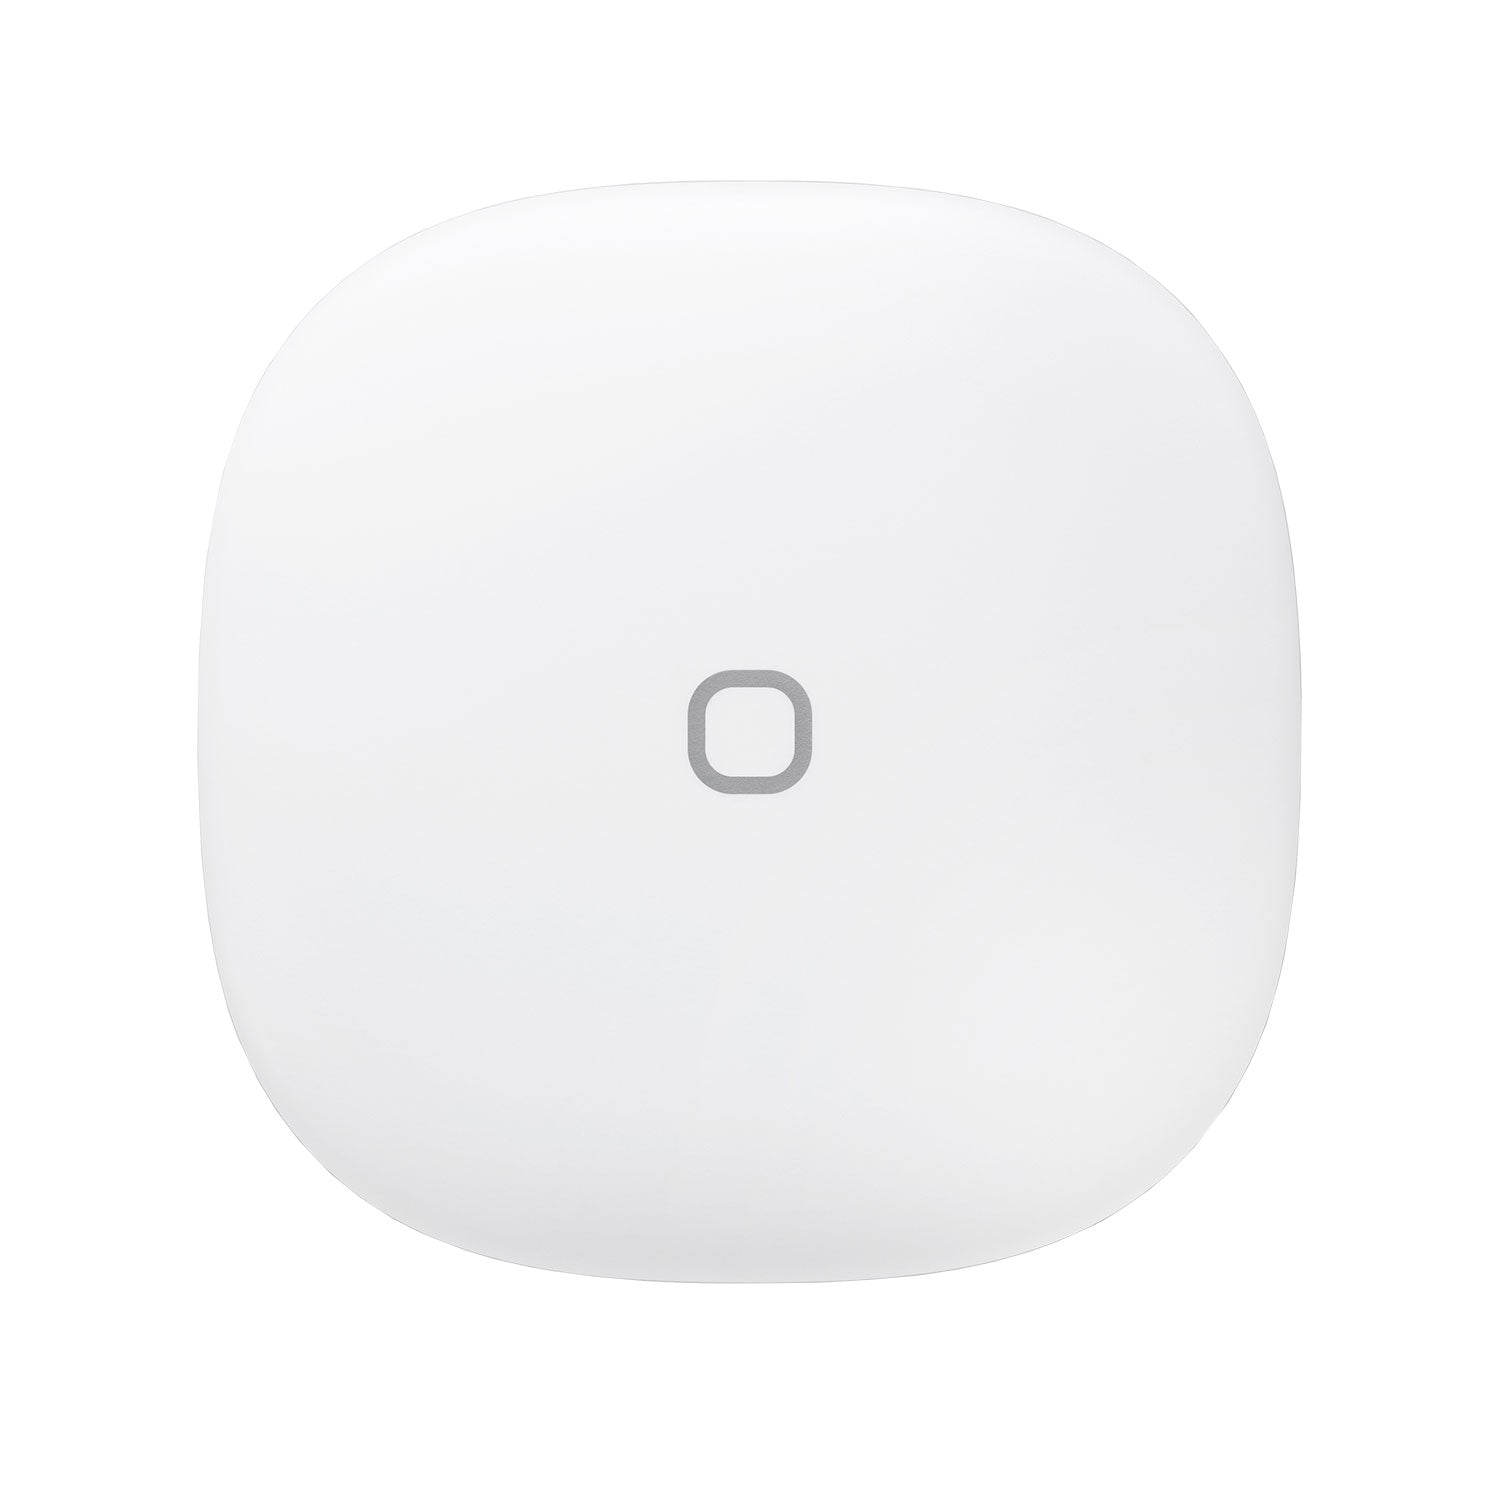 Aeotec SmartThings Button (Zigbee) Frontansicht